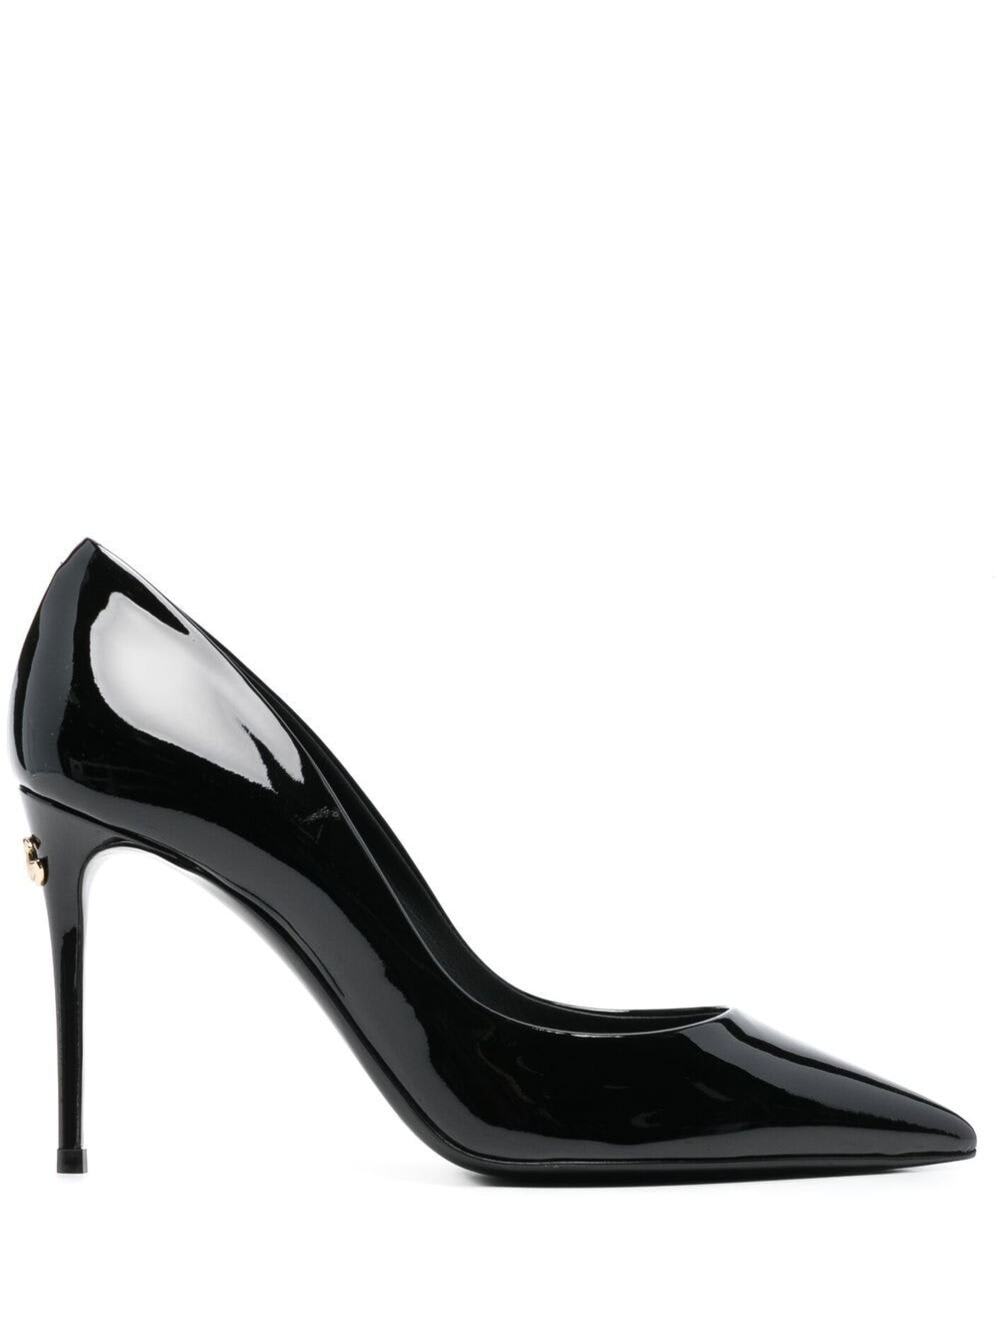 Black Pumps In Patent Leather Dolce & Gabbana Woman